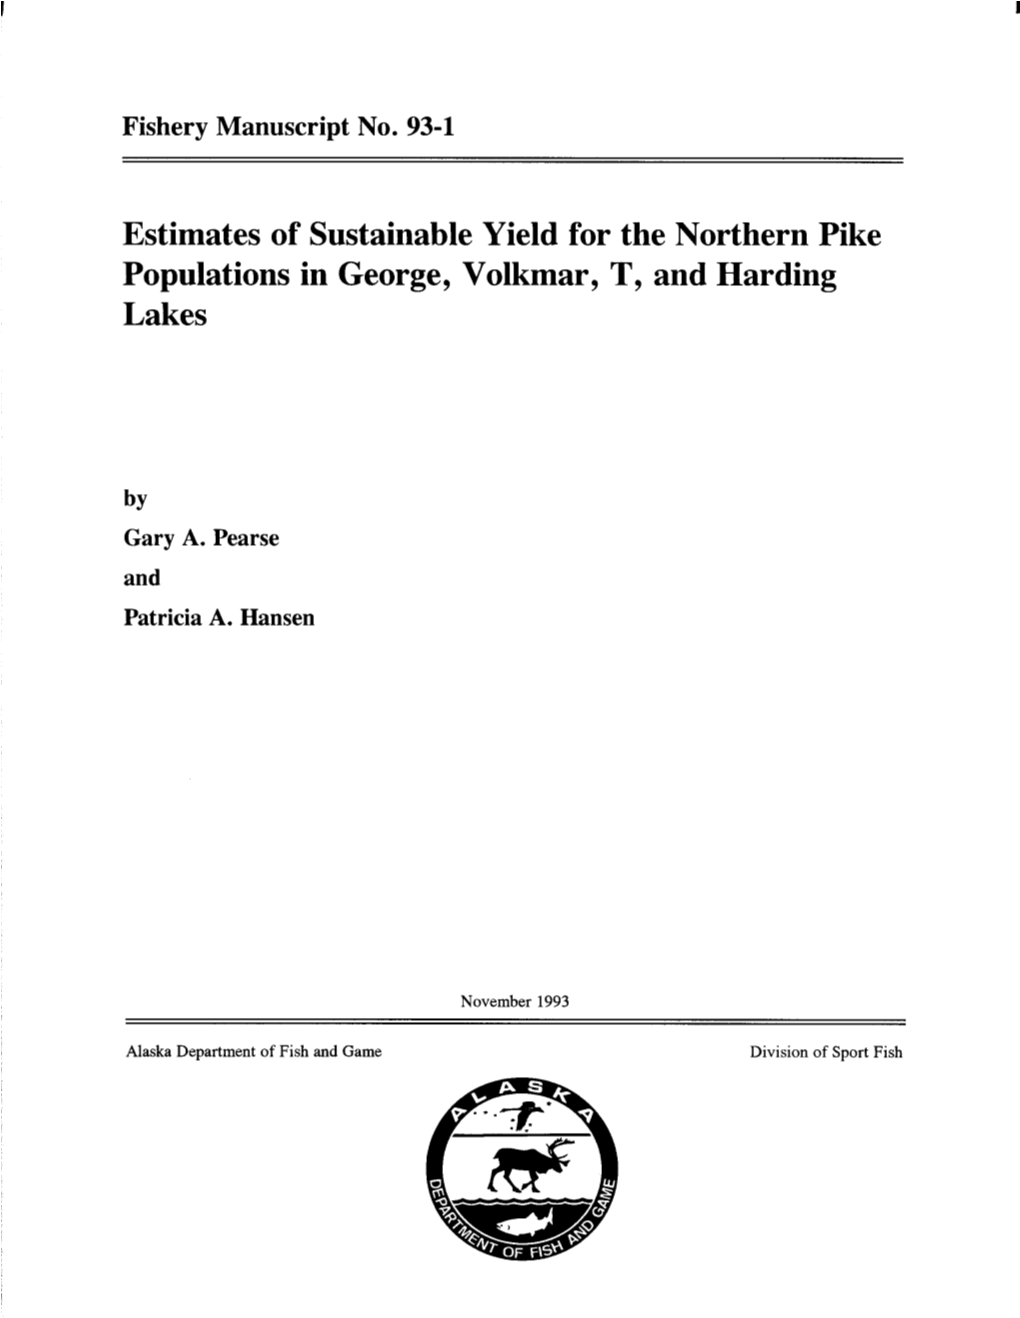 Estimates of Sustainable Yield for the Northern Pike Populations in George, Volkmar, T, and Harding Lakes